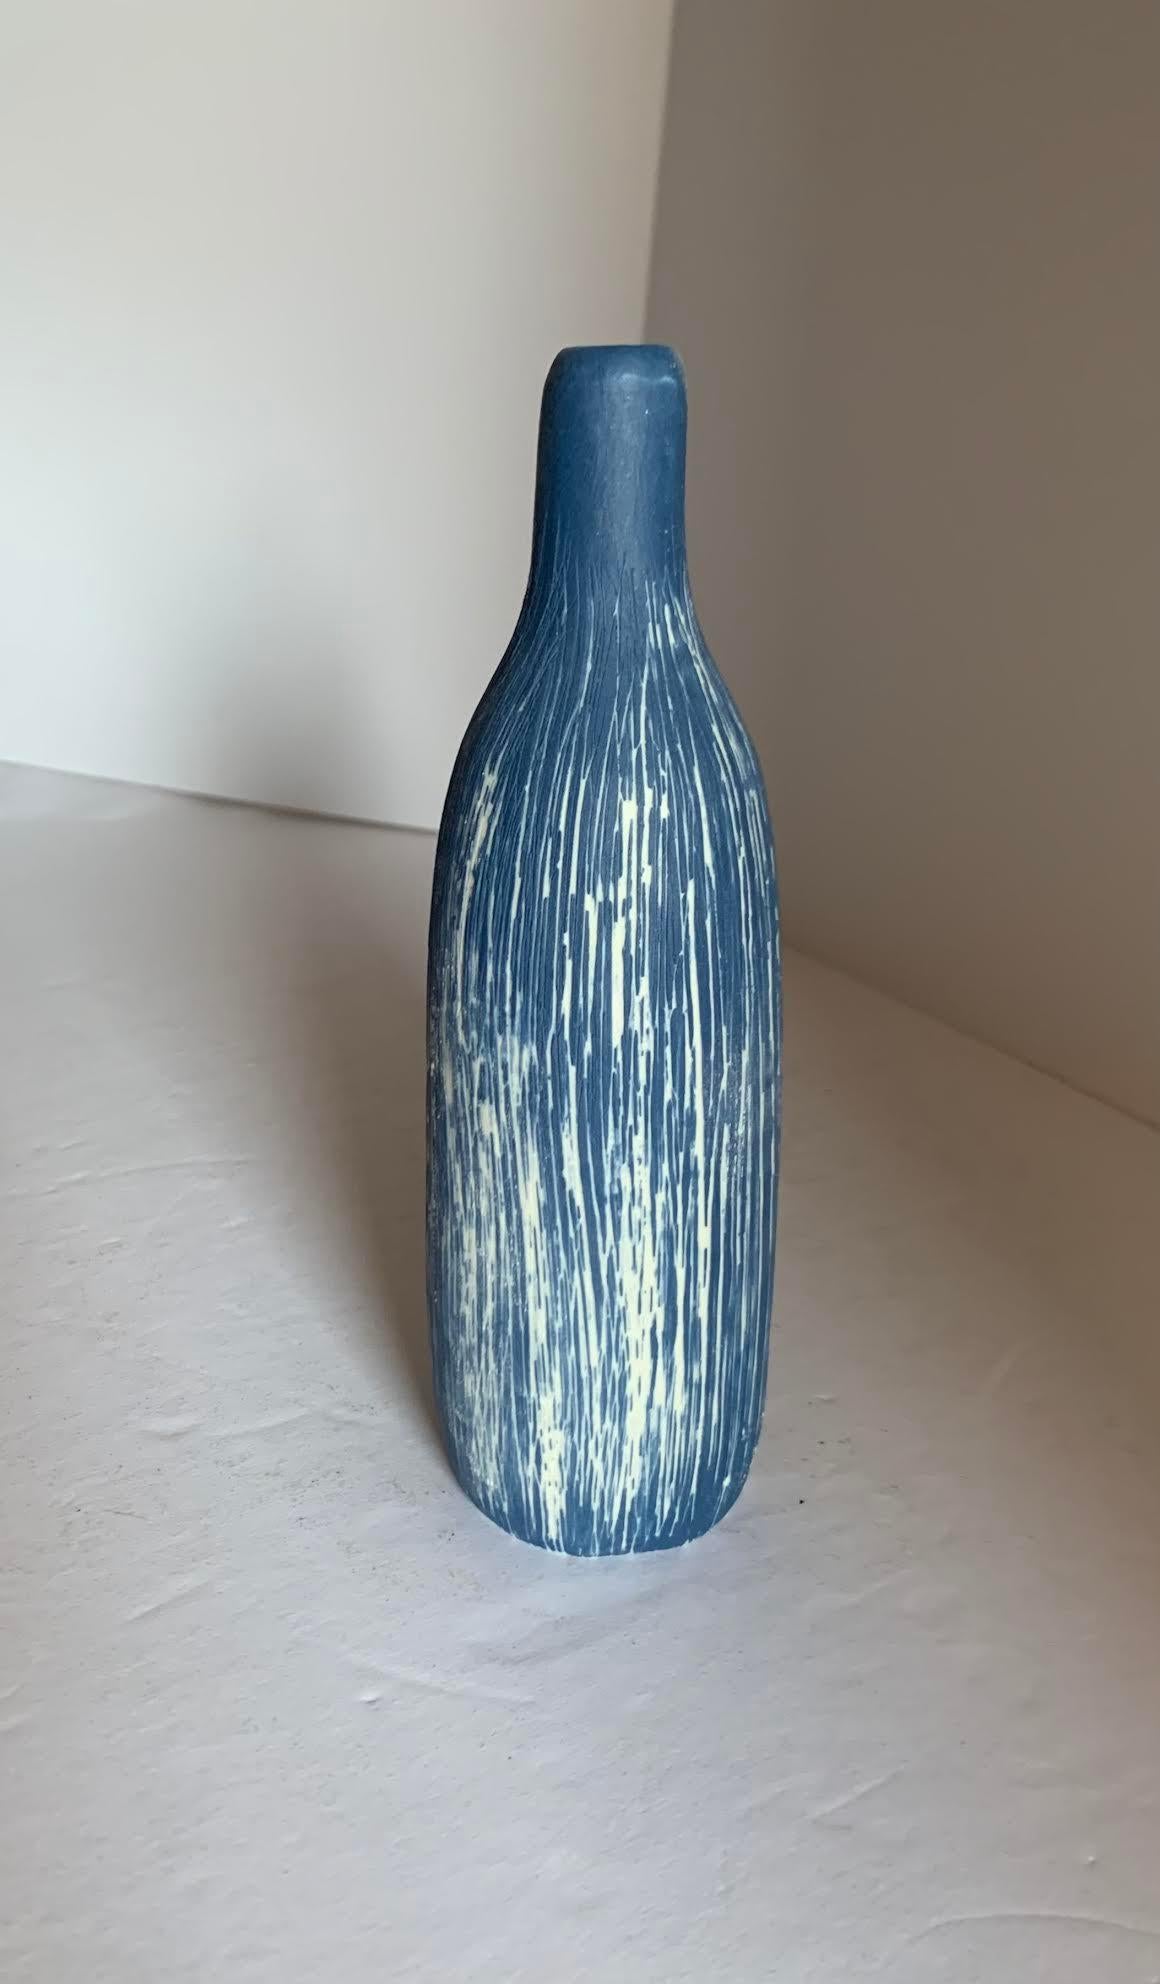 Italian Blue and White Vertical Lines Ceramic Vase, Italy, Contemporary